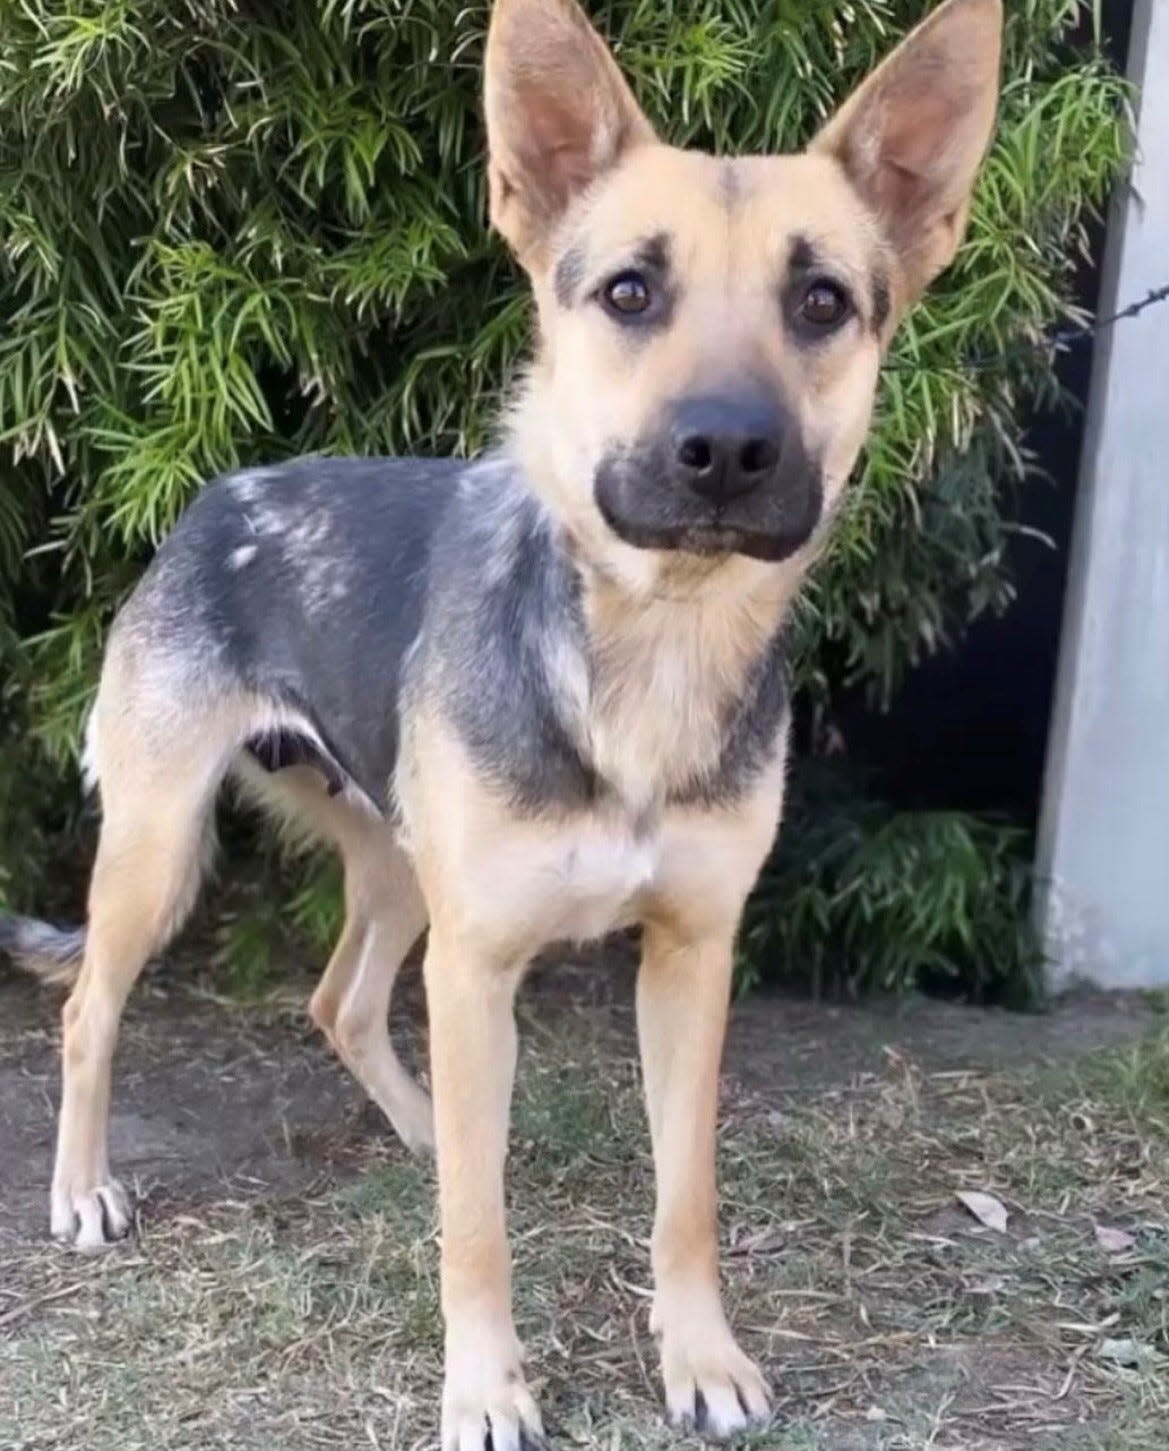 Pretty Girl, a 3-year-old rescue dog, was stolen from the Paw Works shelter in Camarillo last week. She found with severe injuries on the side of Highway 101 a few hours later and then died.